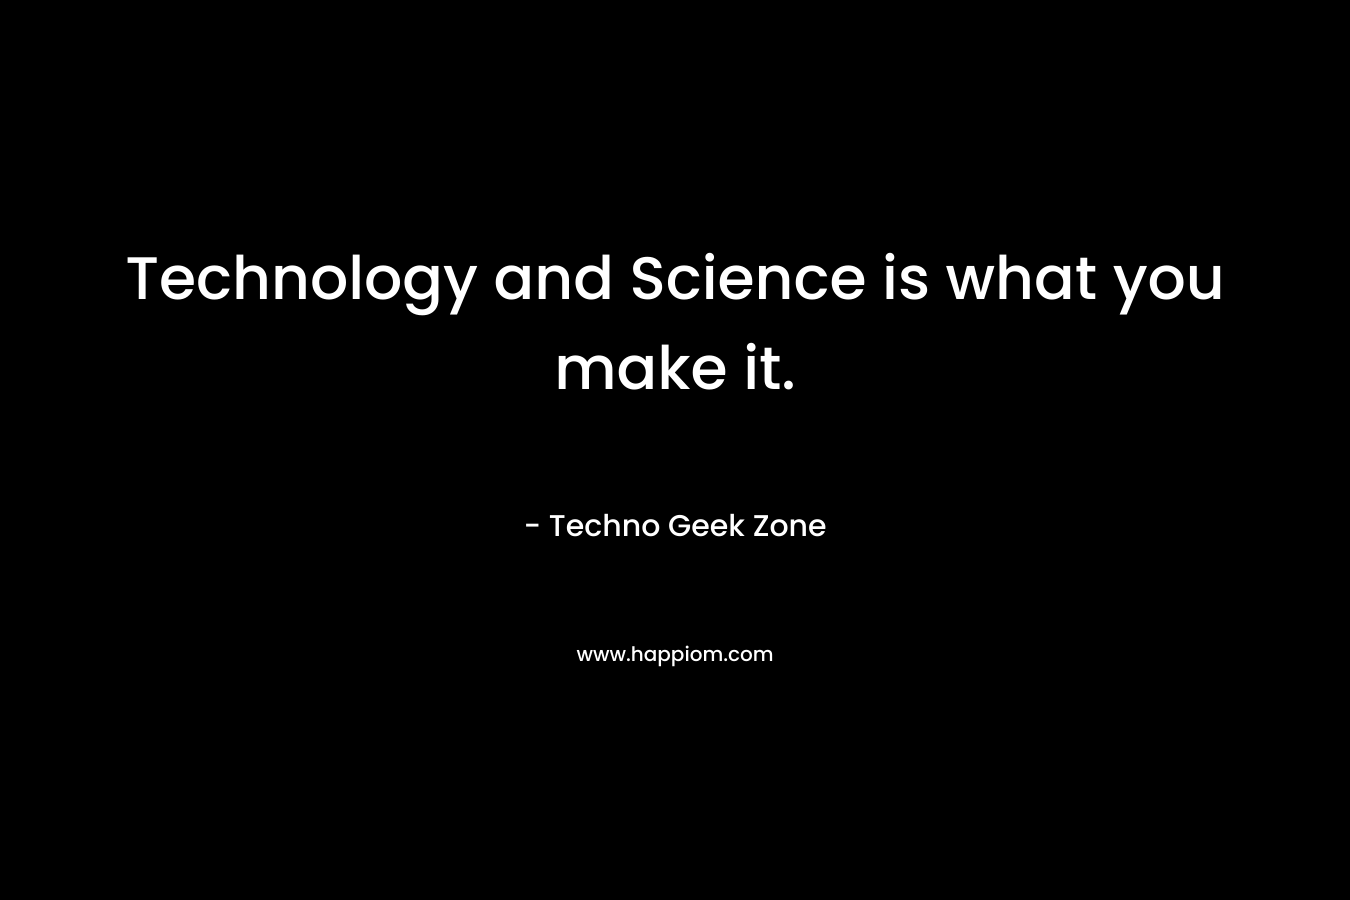 Technology and Science is what you make it.